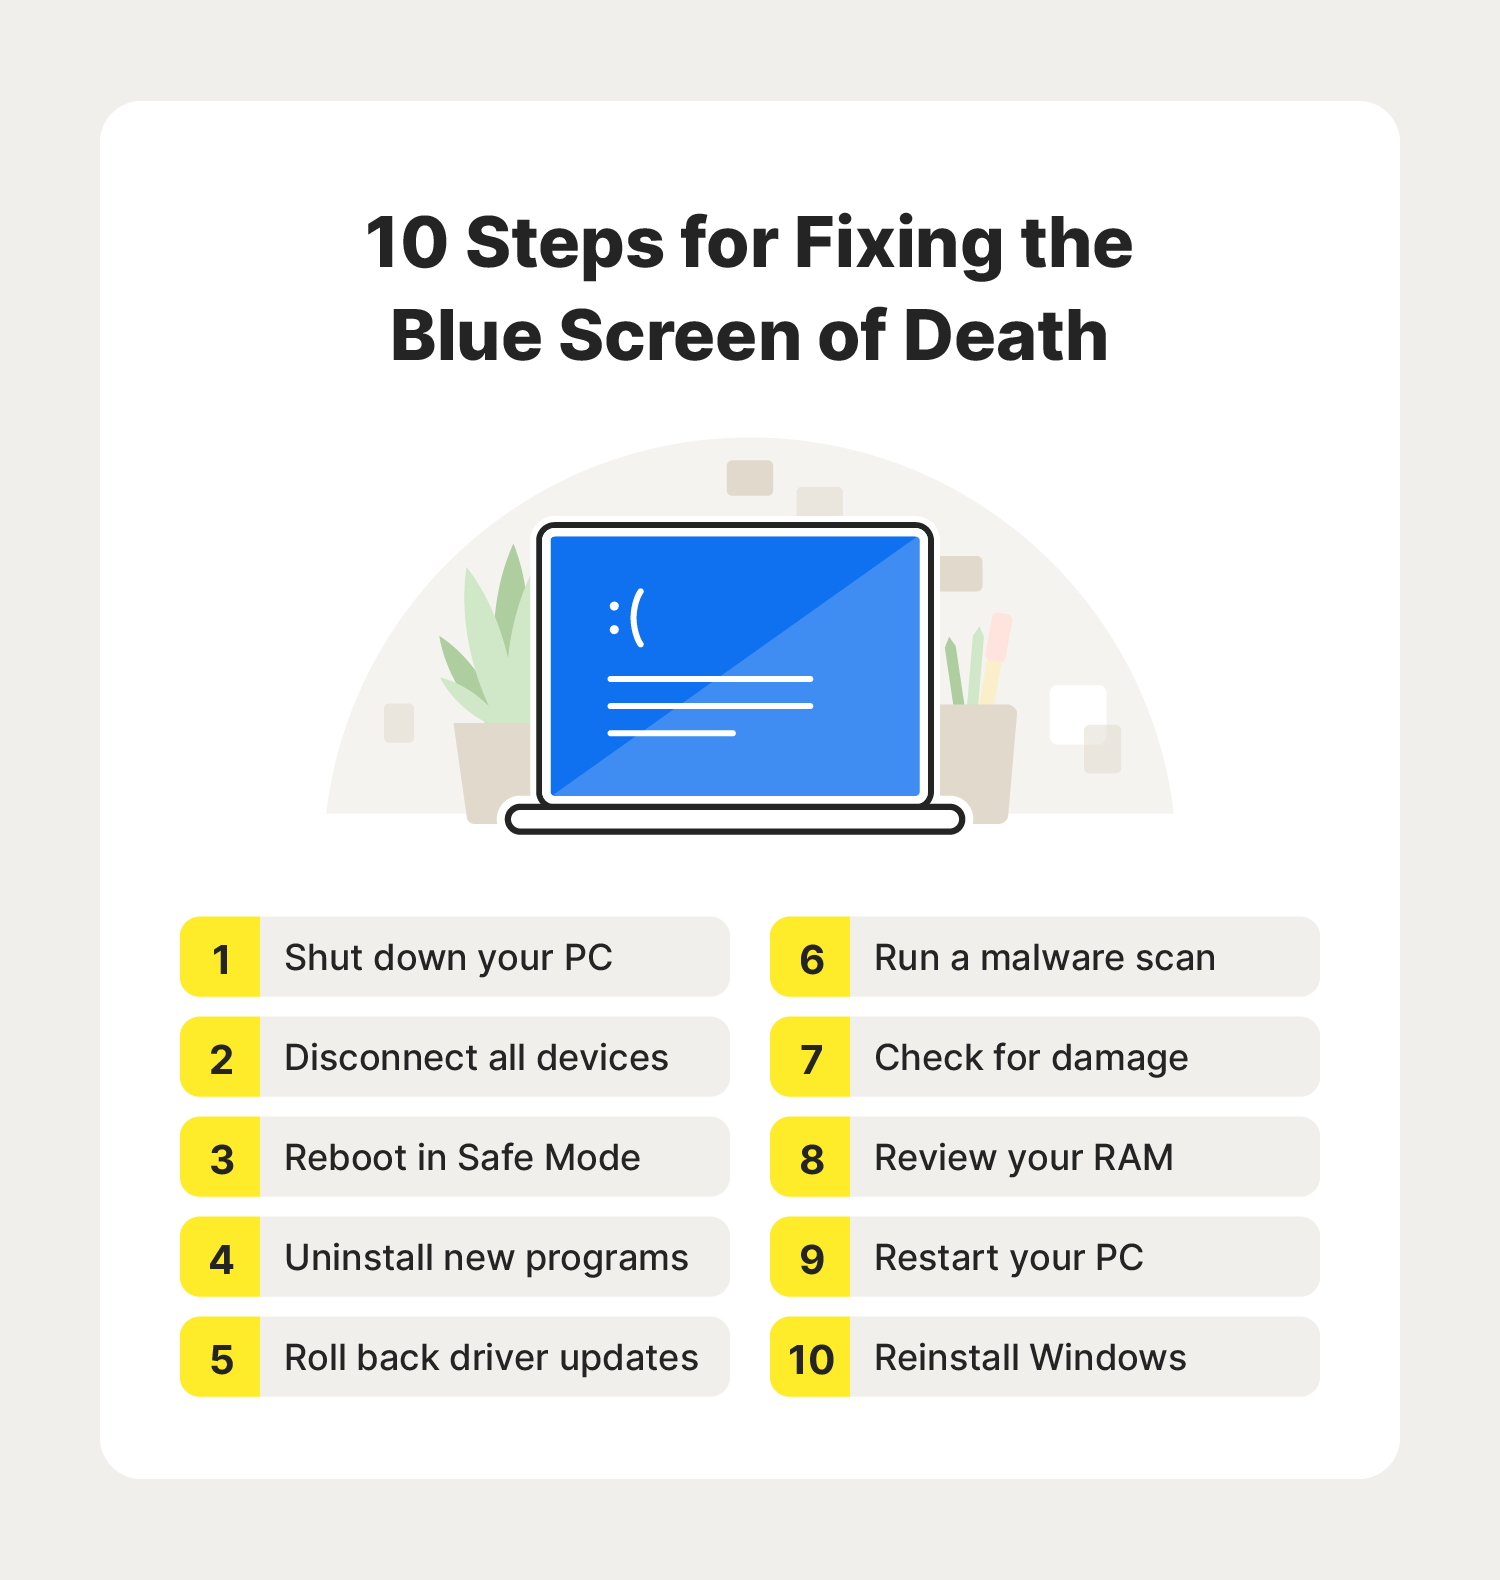 A graphic answers how to fix the blue screen of death on Windows in 10 steps.